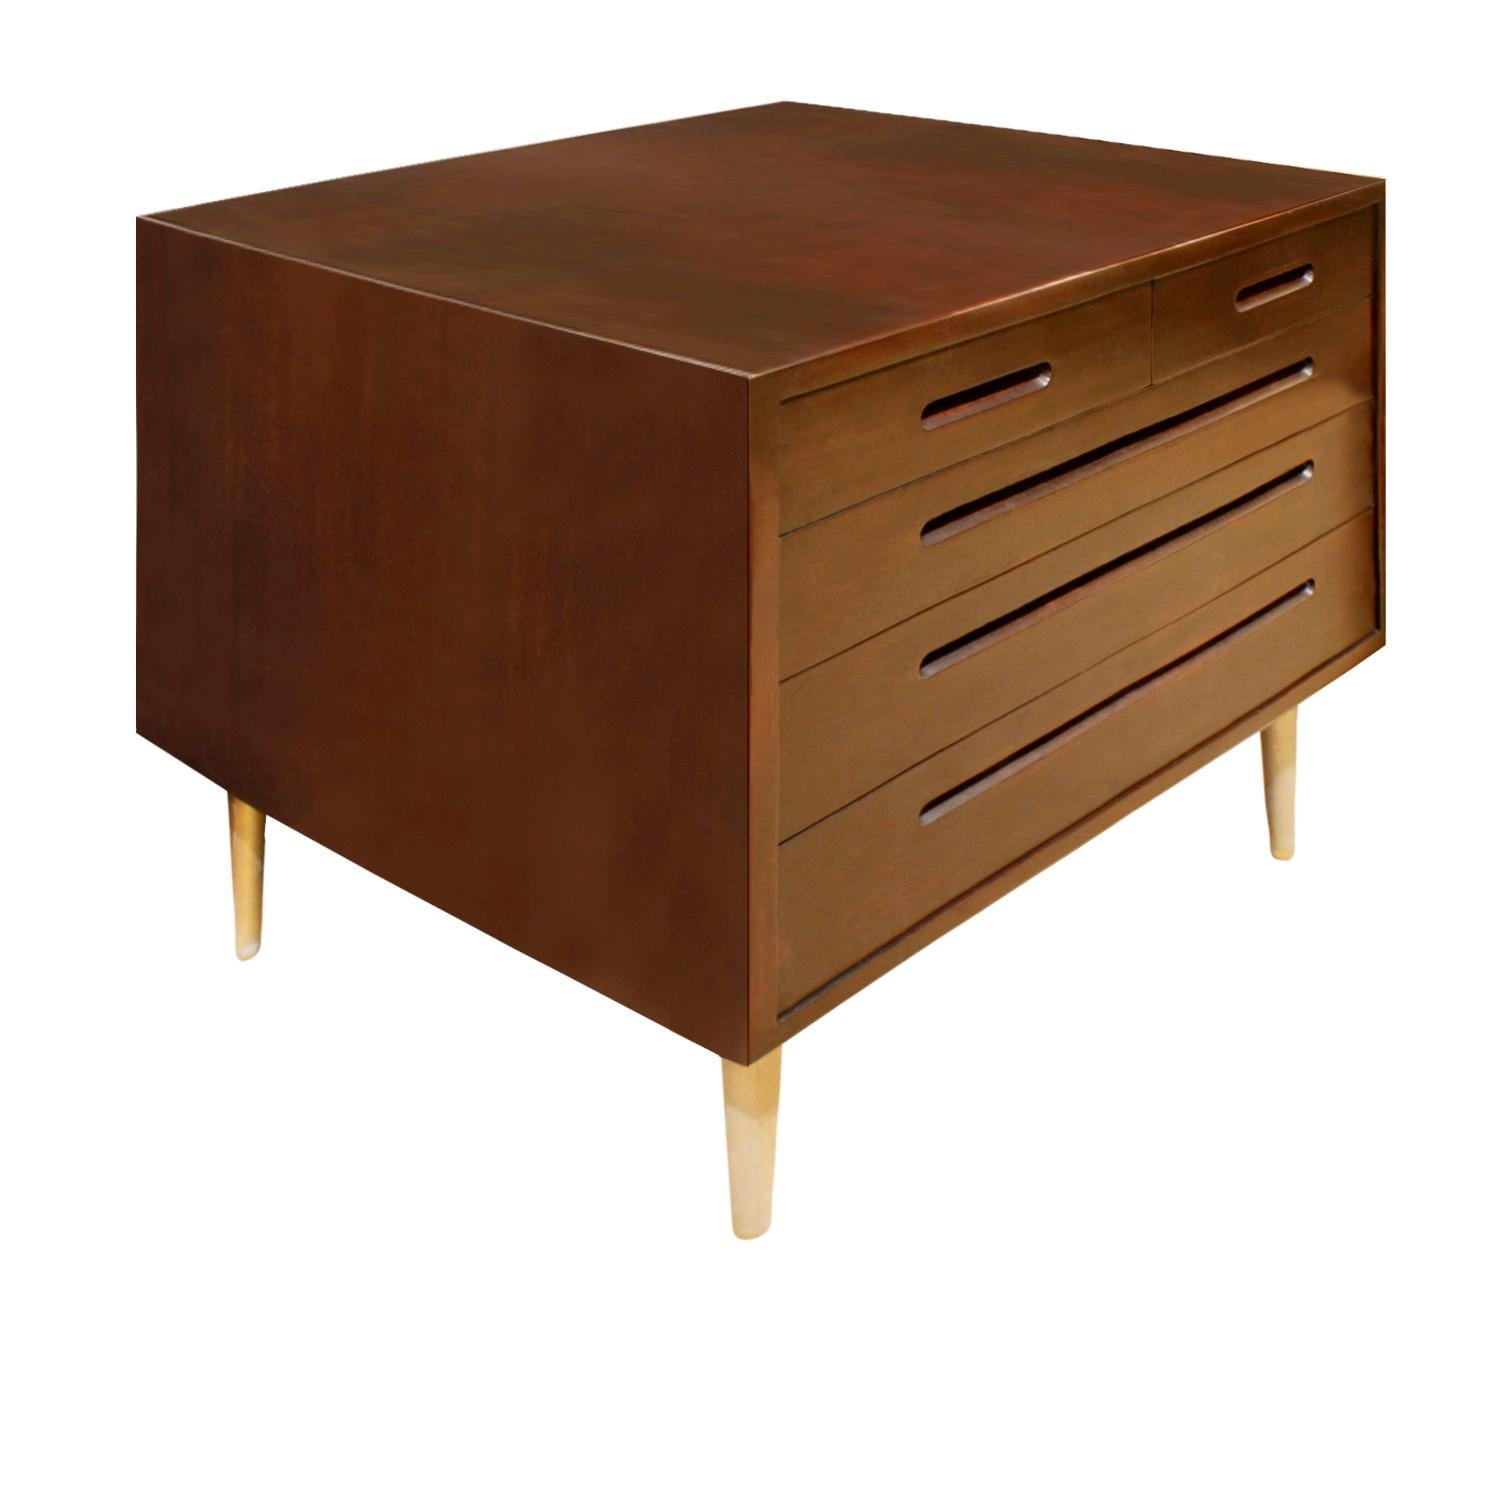 Rare side table with chest in mahogany with recessed pulls and conical brass legs by Edward Wormley for Dunbar, American 1940s (signed on drawer with Dunbar tag). This is a rare Wormley side table.